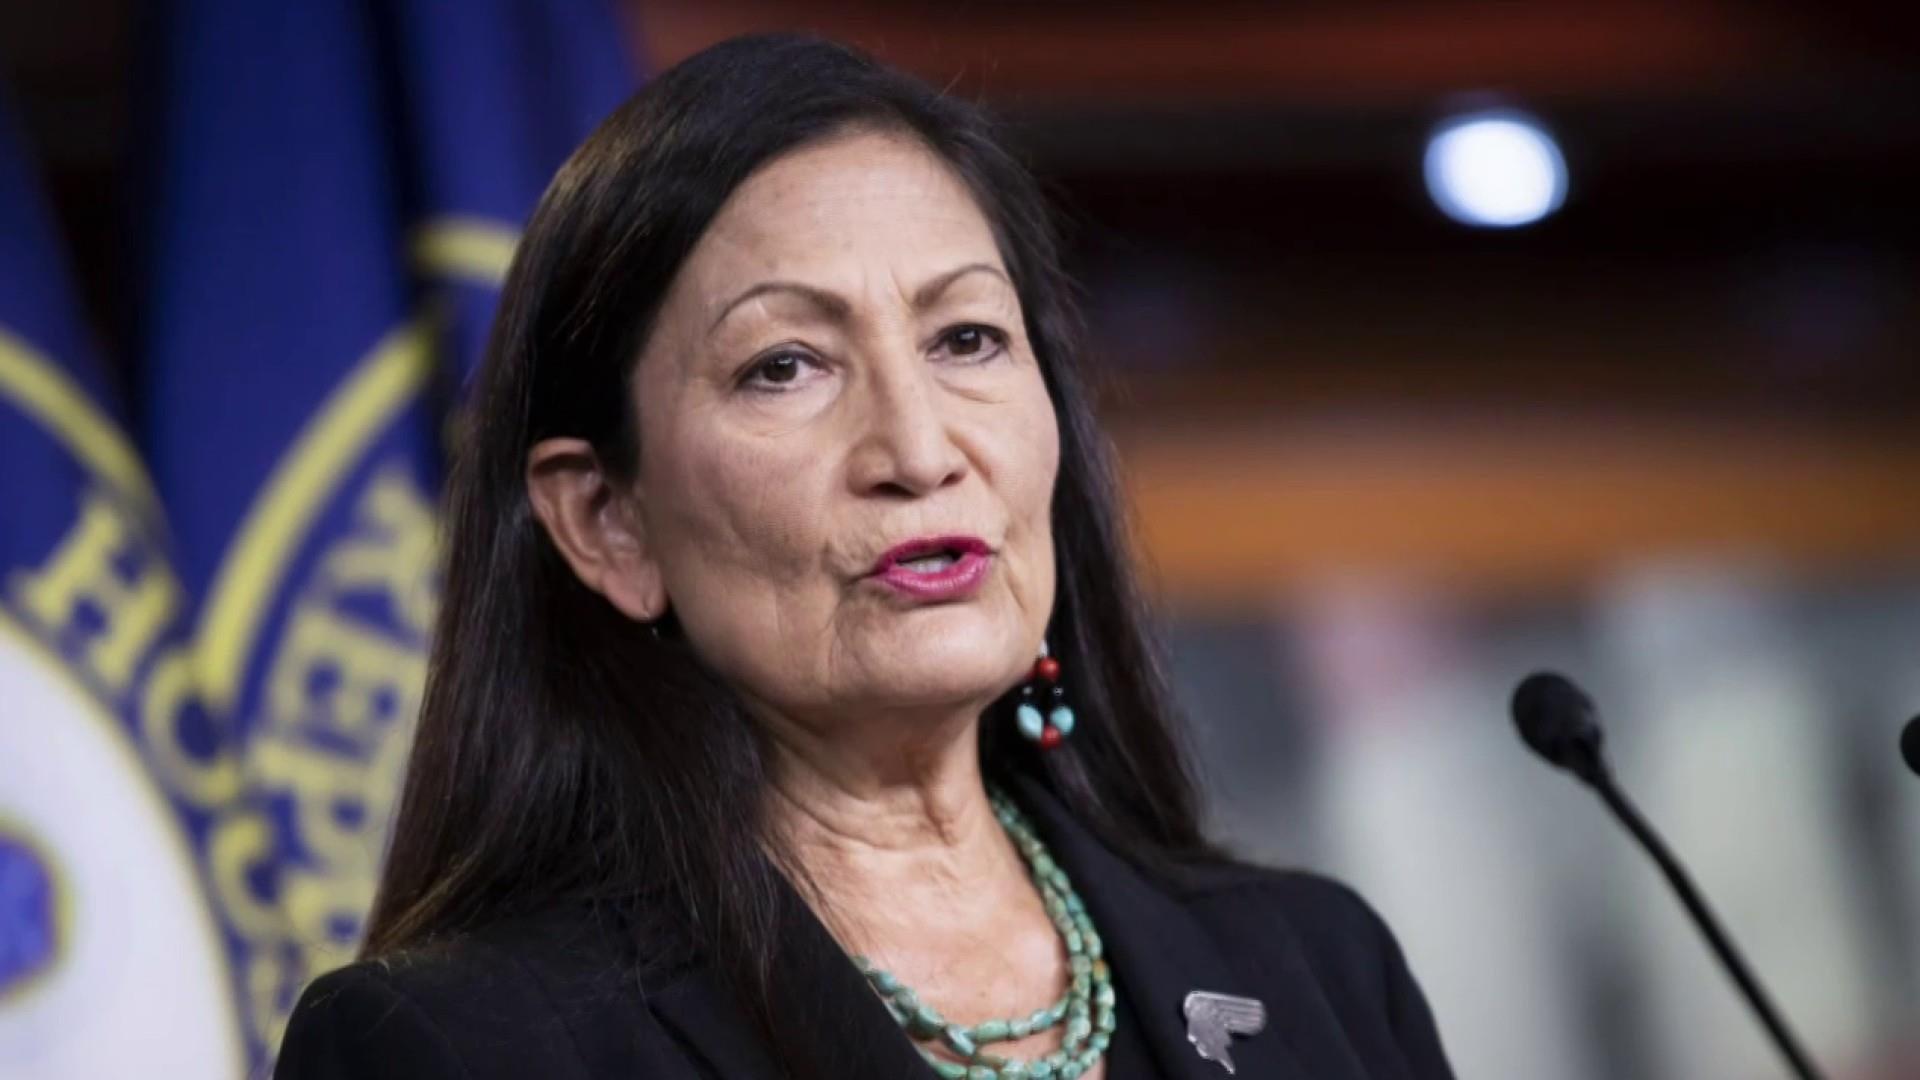 Biden to nominate Obtain. Deb Haaland as first Native American to lead Interior Department